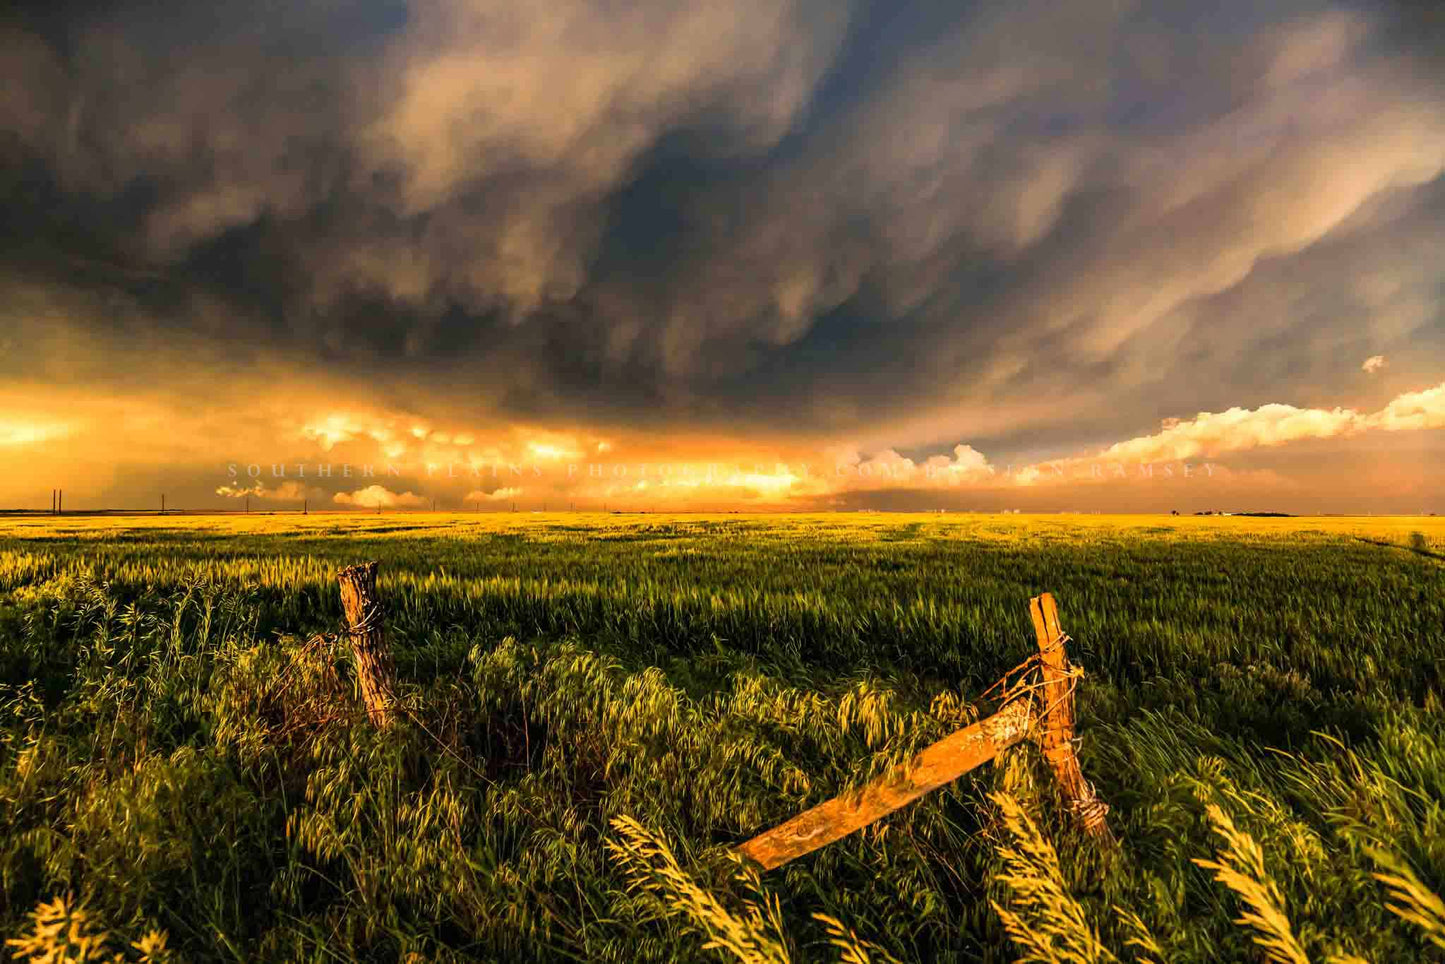 Great plains photography print of storm clouds illuminated by golden sunlight over barbed wire fence posts in a wheat field on a stormy evening in Kansas by Sean Ramsey of Southern Plains Photography.